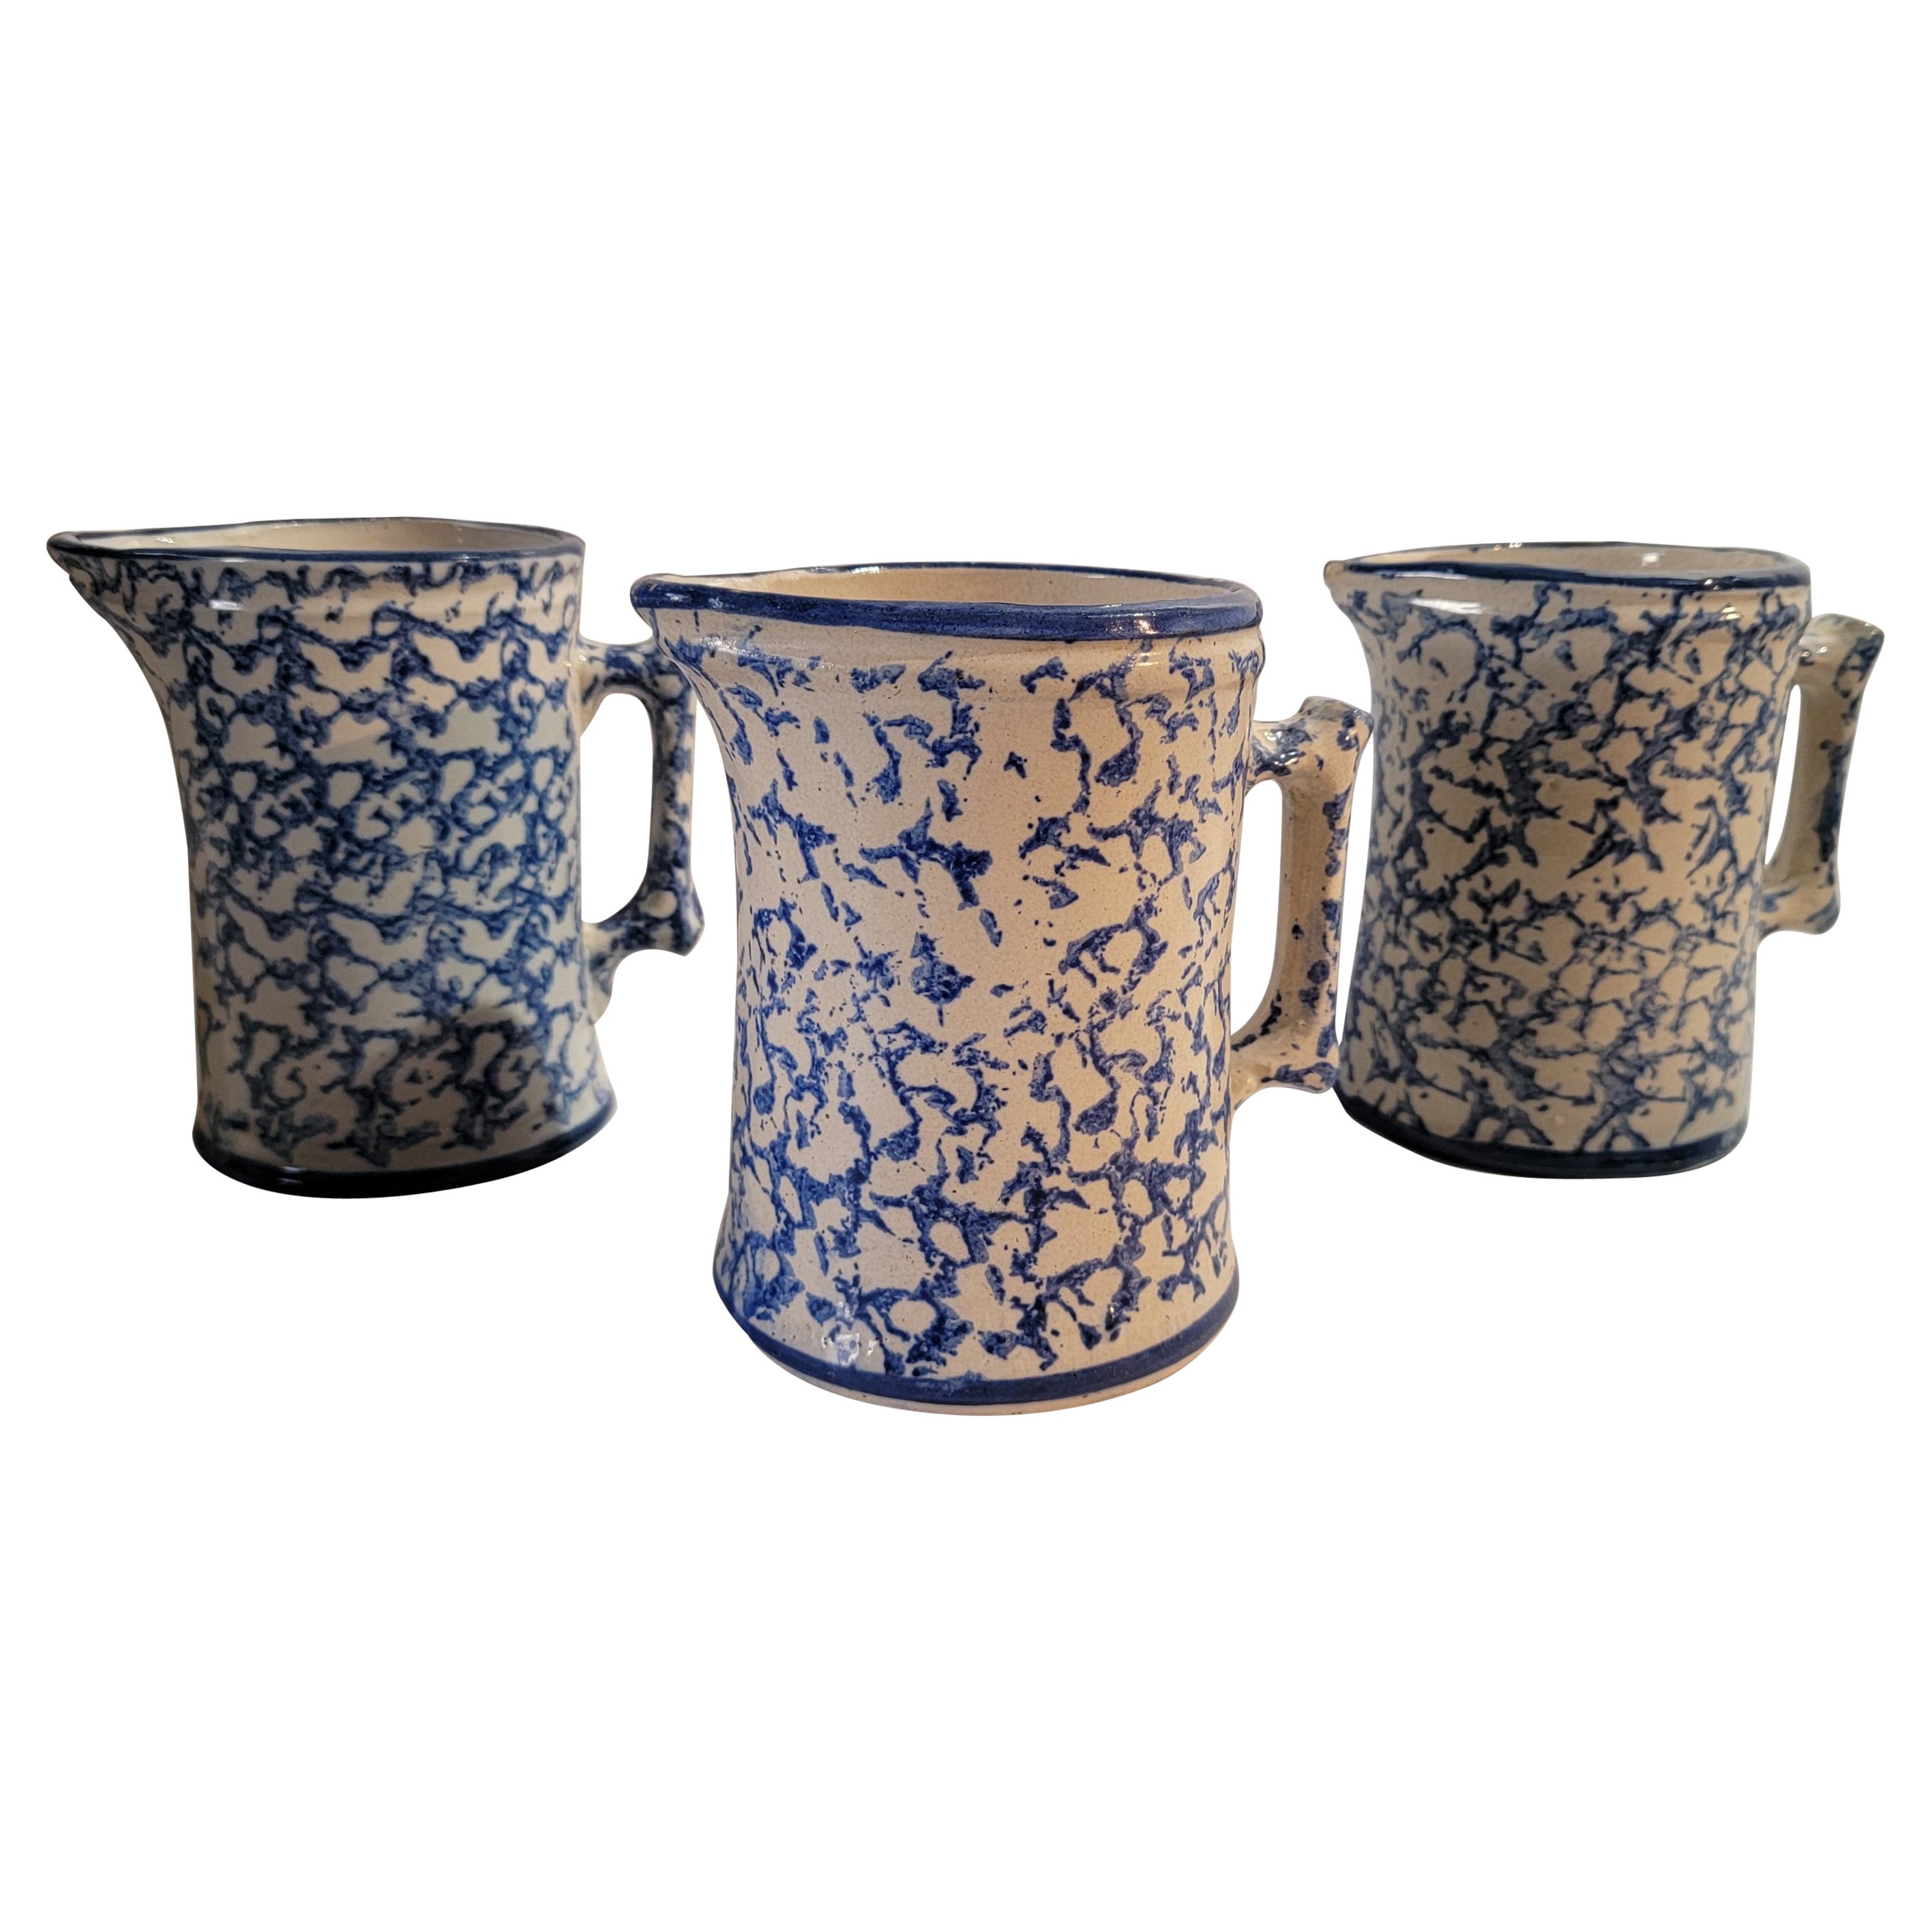 Group of Three 19th C Sponge Ware Pitchers For Sale